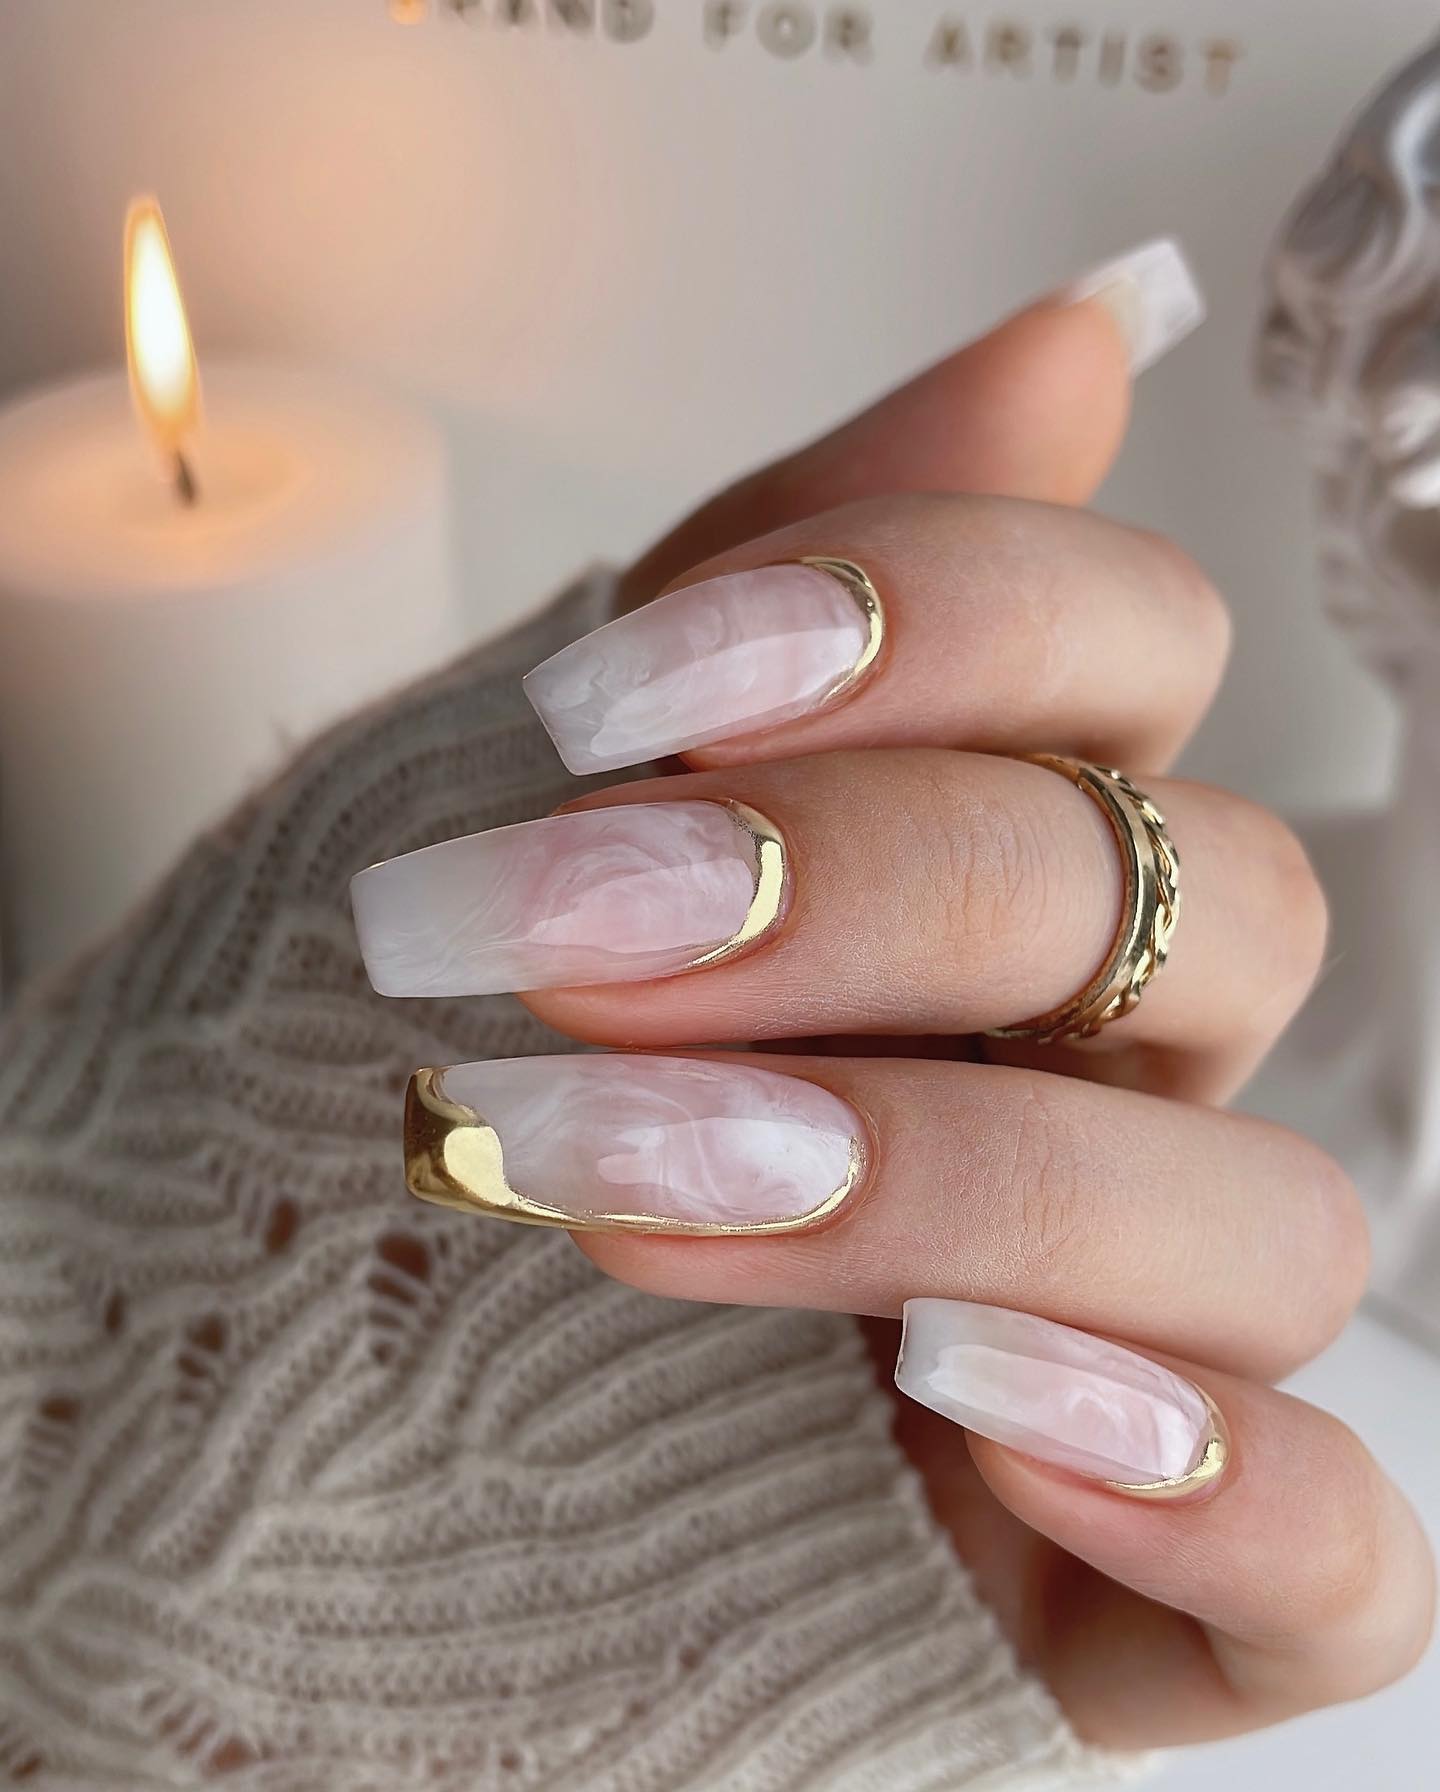 100+ Best Winter Nail Ideas And Designs To Try images 35